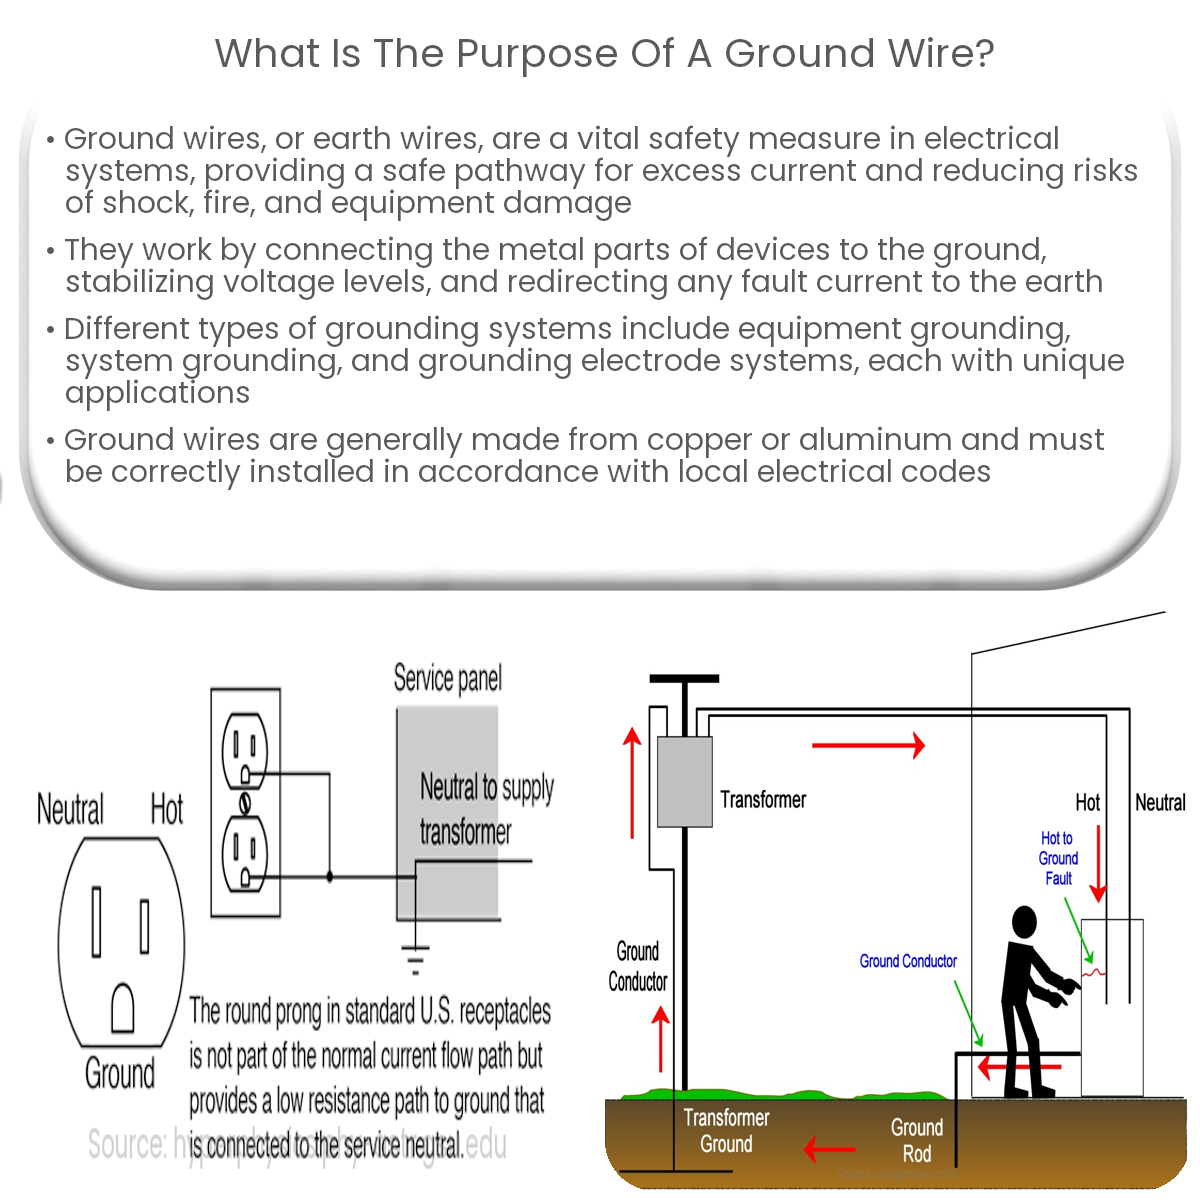 What is the purpose of a ground wire?